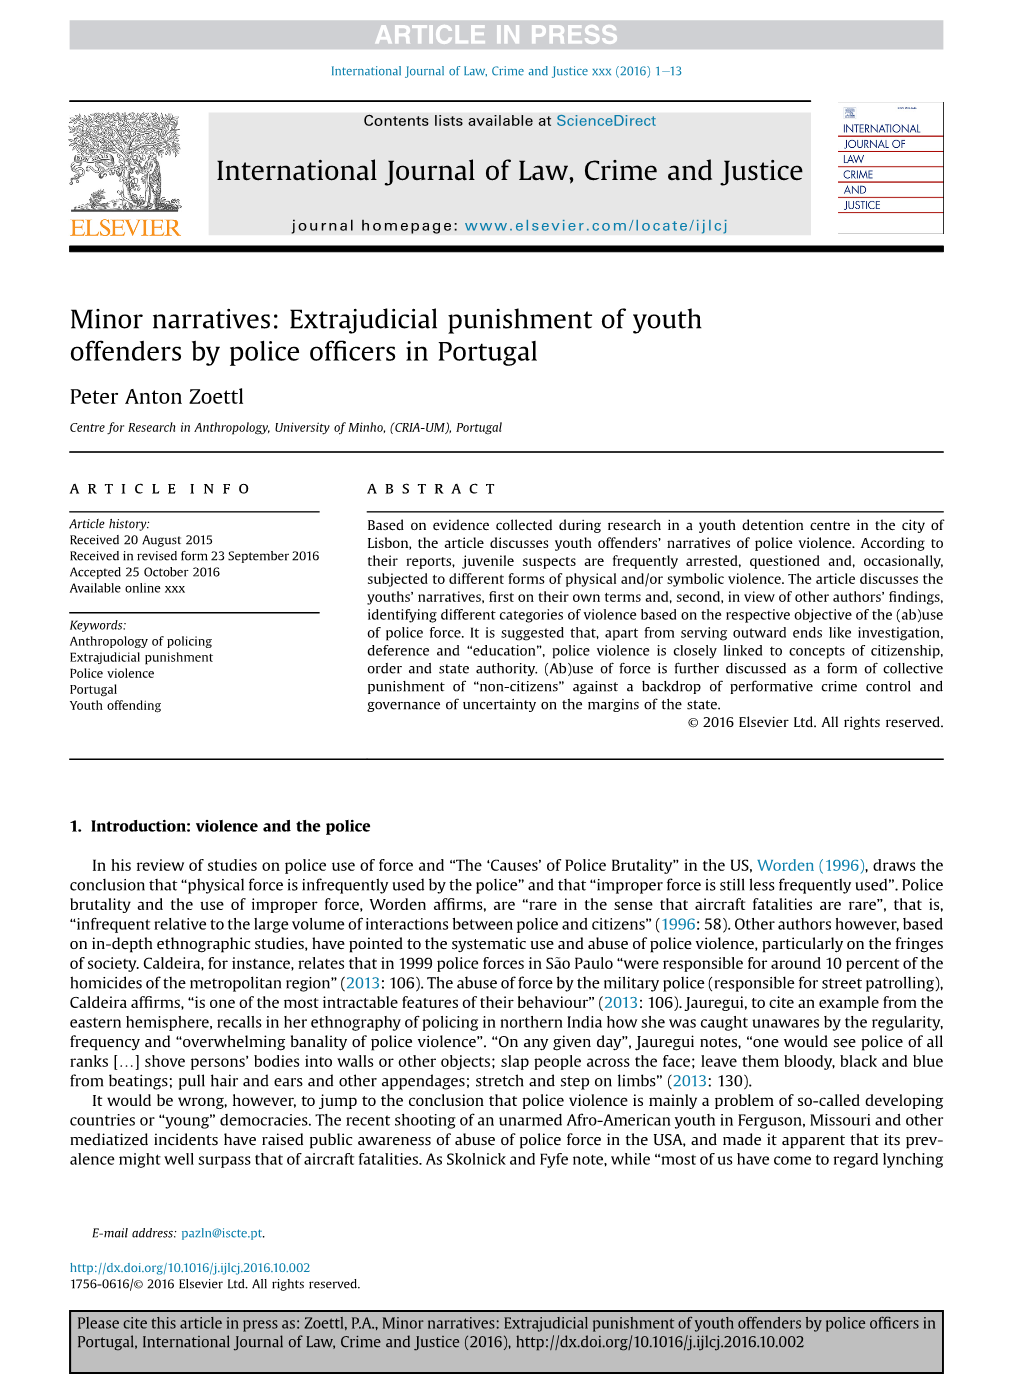 Extrajudicial Punishment of Youth Offenders by Police Officers in Portugal